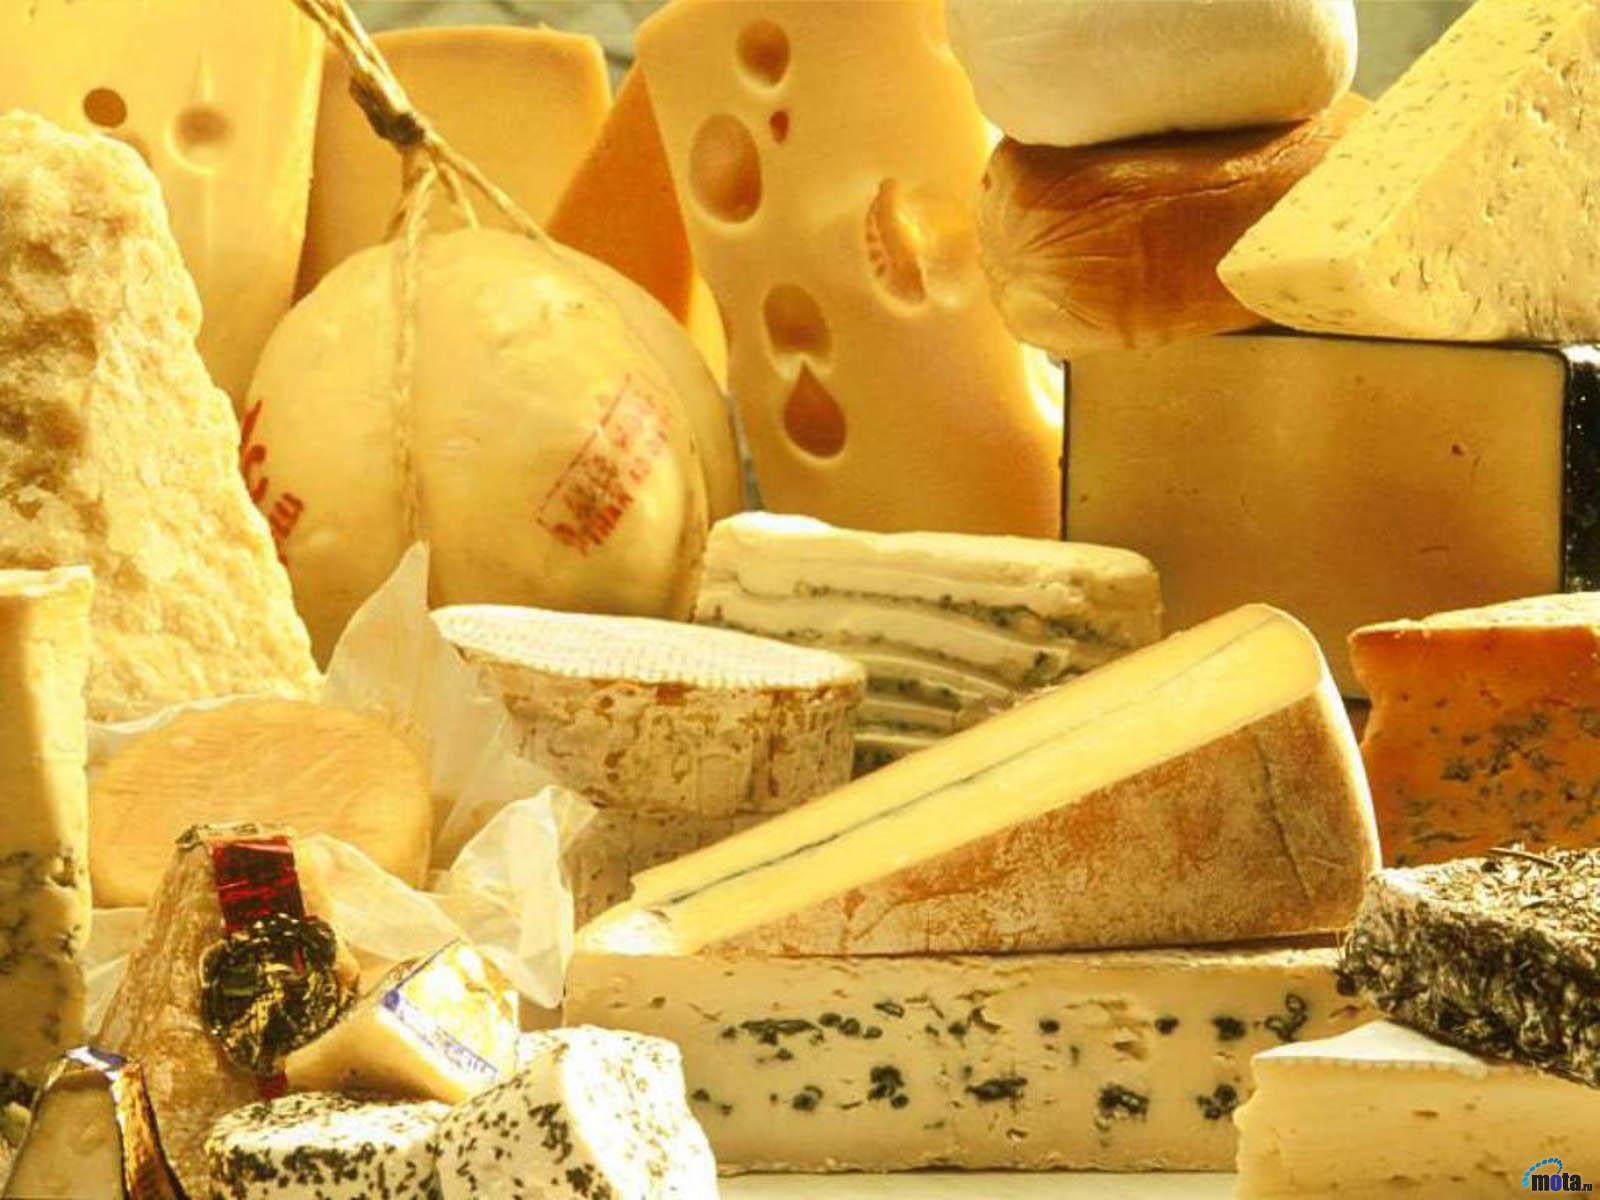 Cheese Wallpaper HD Background, Image, Pics, Photo Free